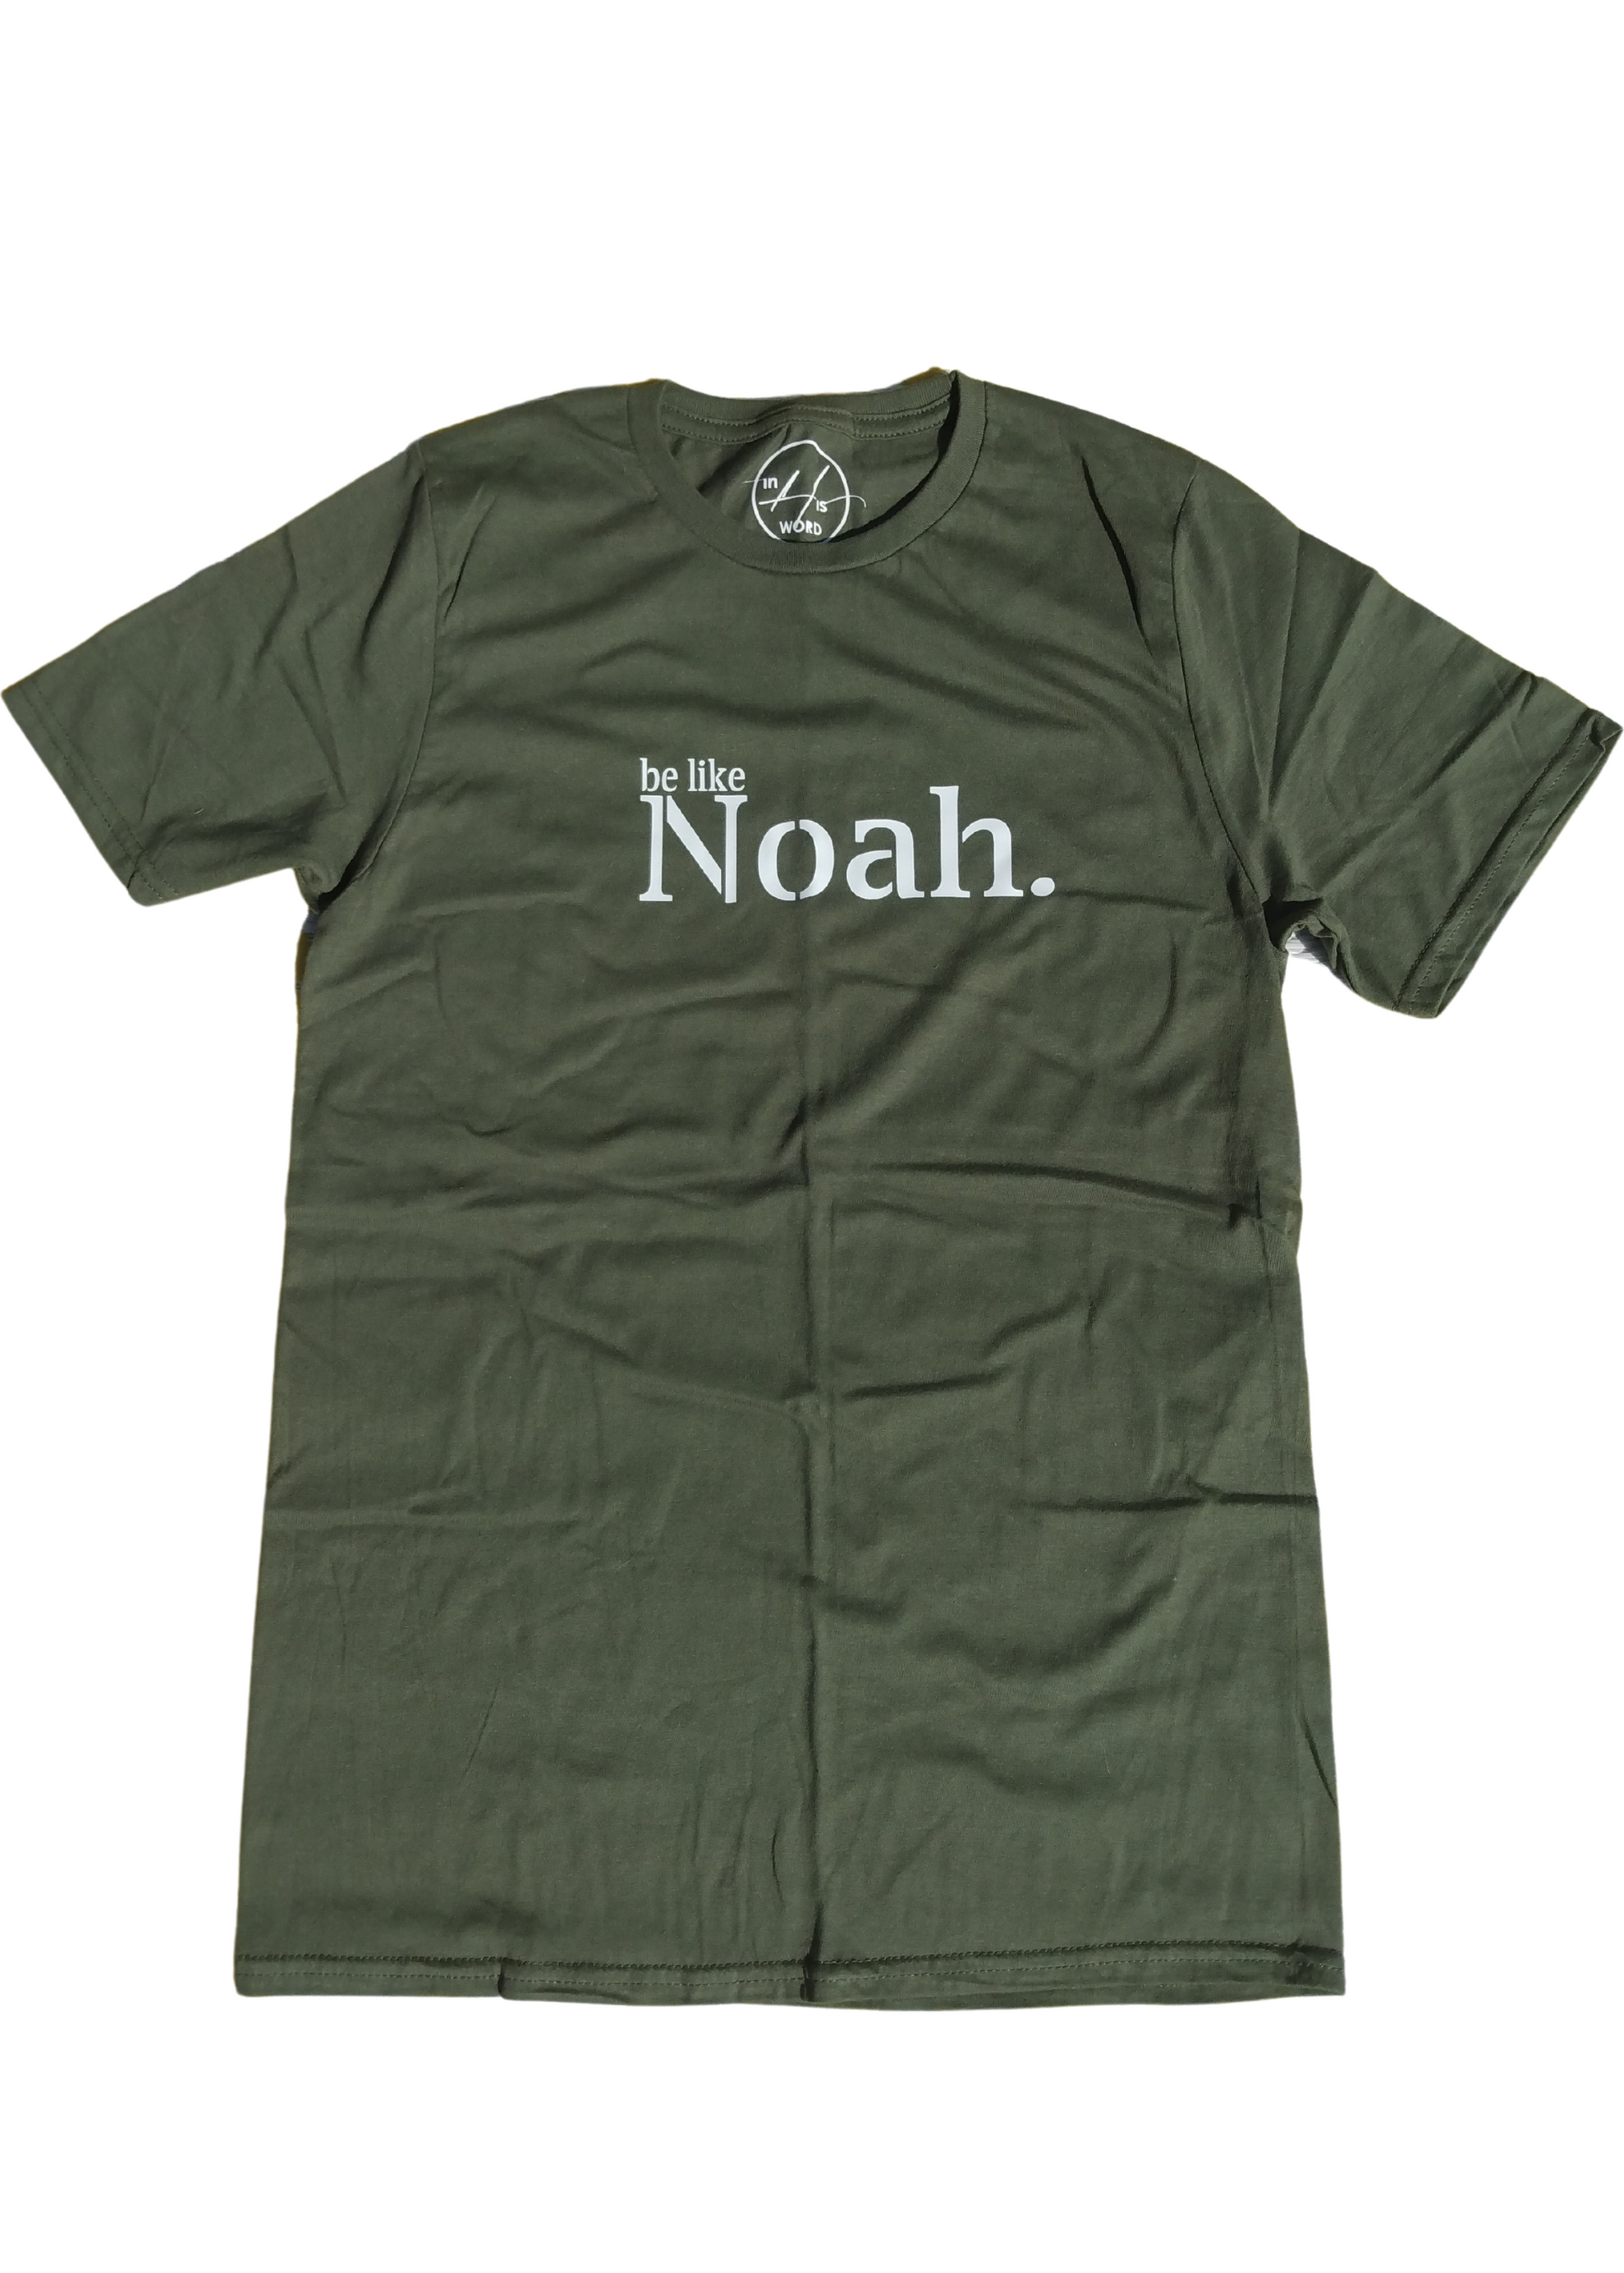 Army green t-shirt is unisex sizing - fits men and women. 100% cotton